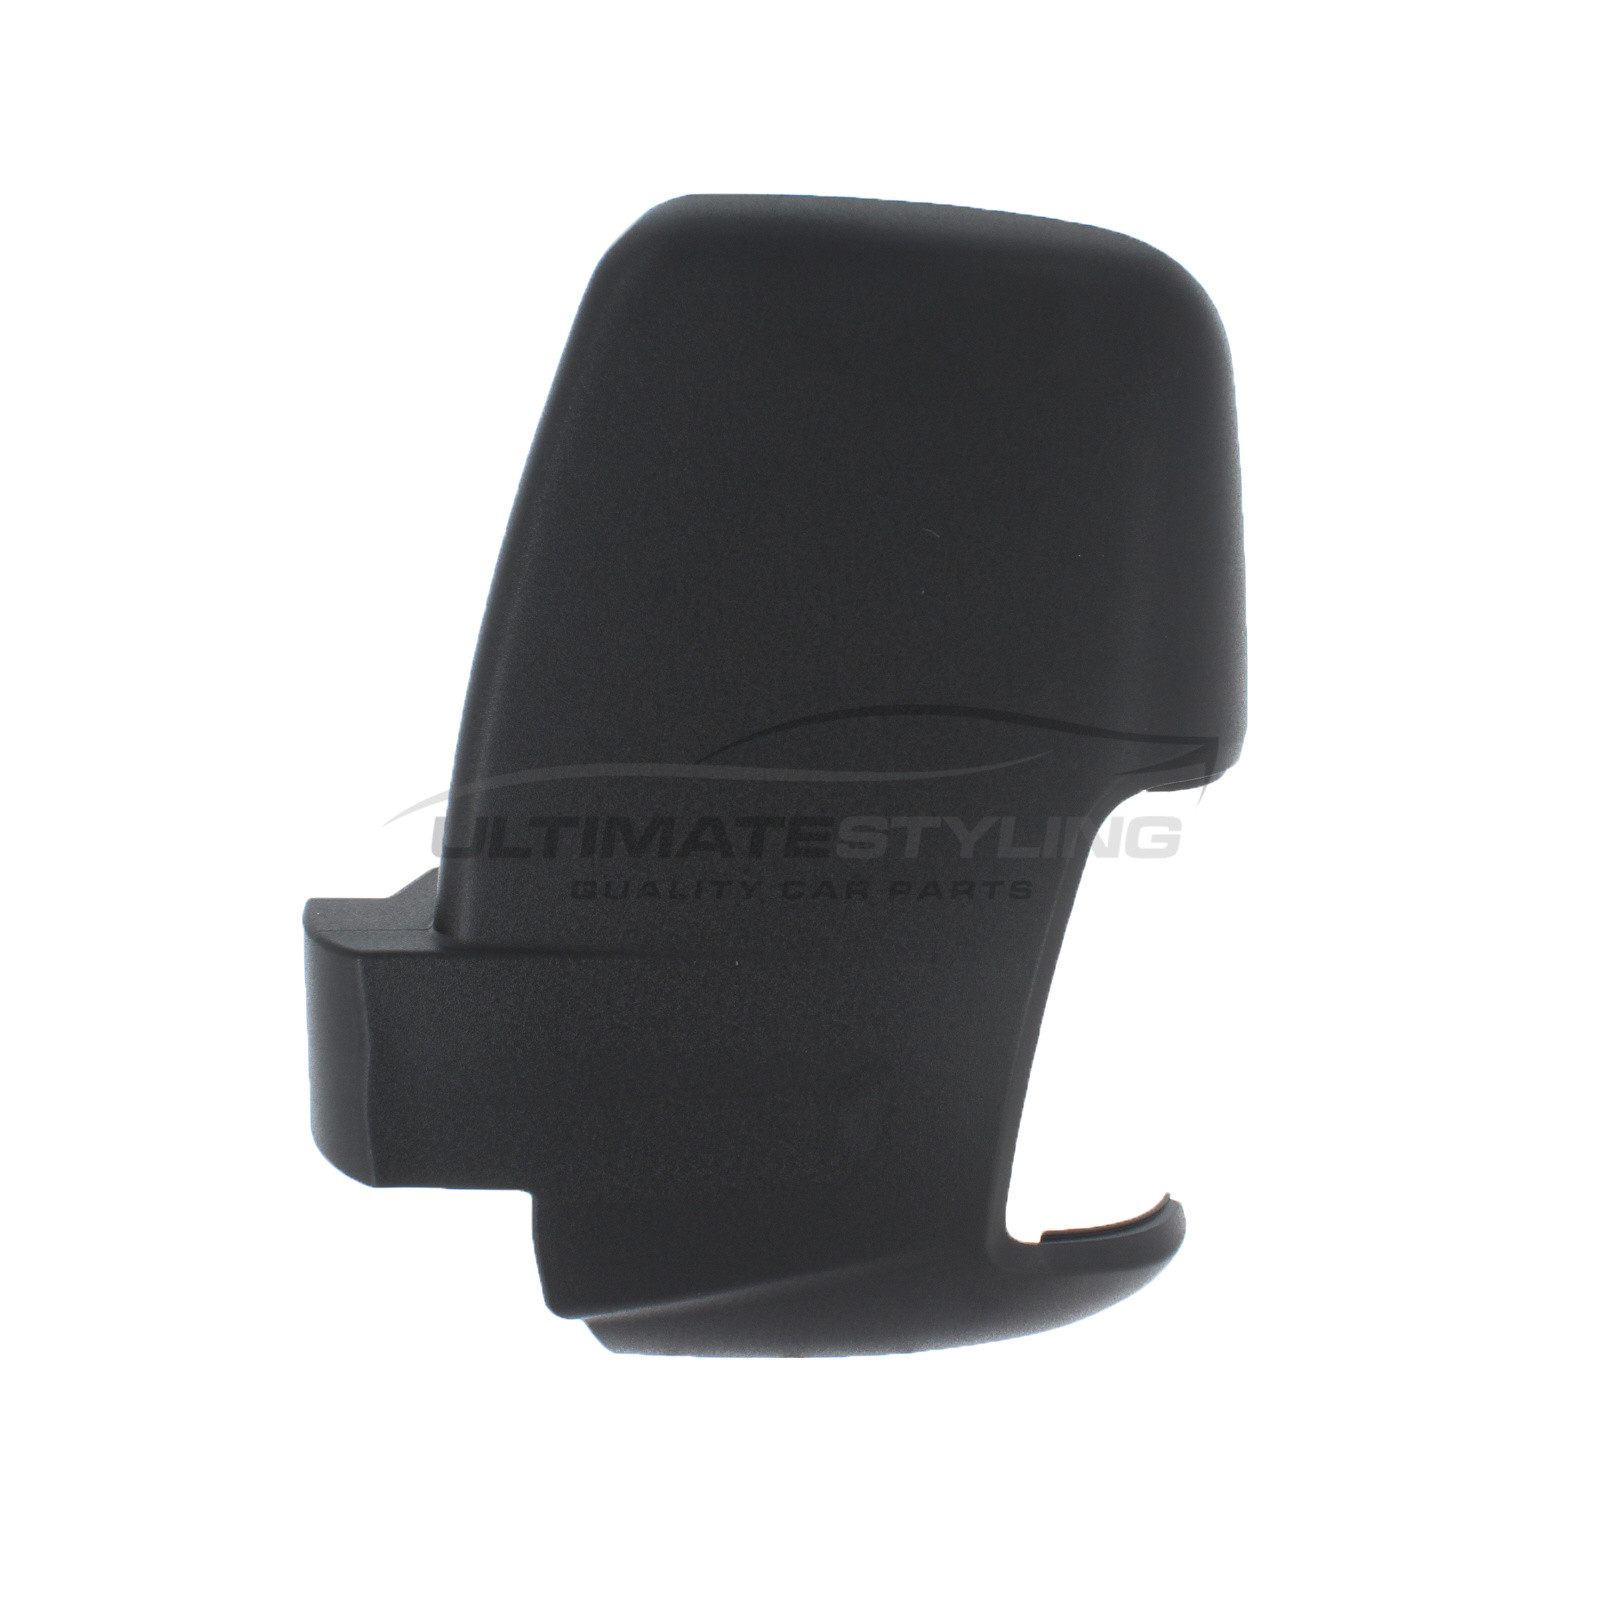 Ford Transit 2014-> Wing Mirror Cover Cap Casing Black (Textured) Passenger Side (LH)